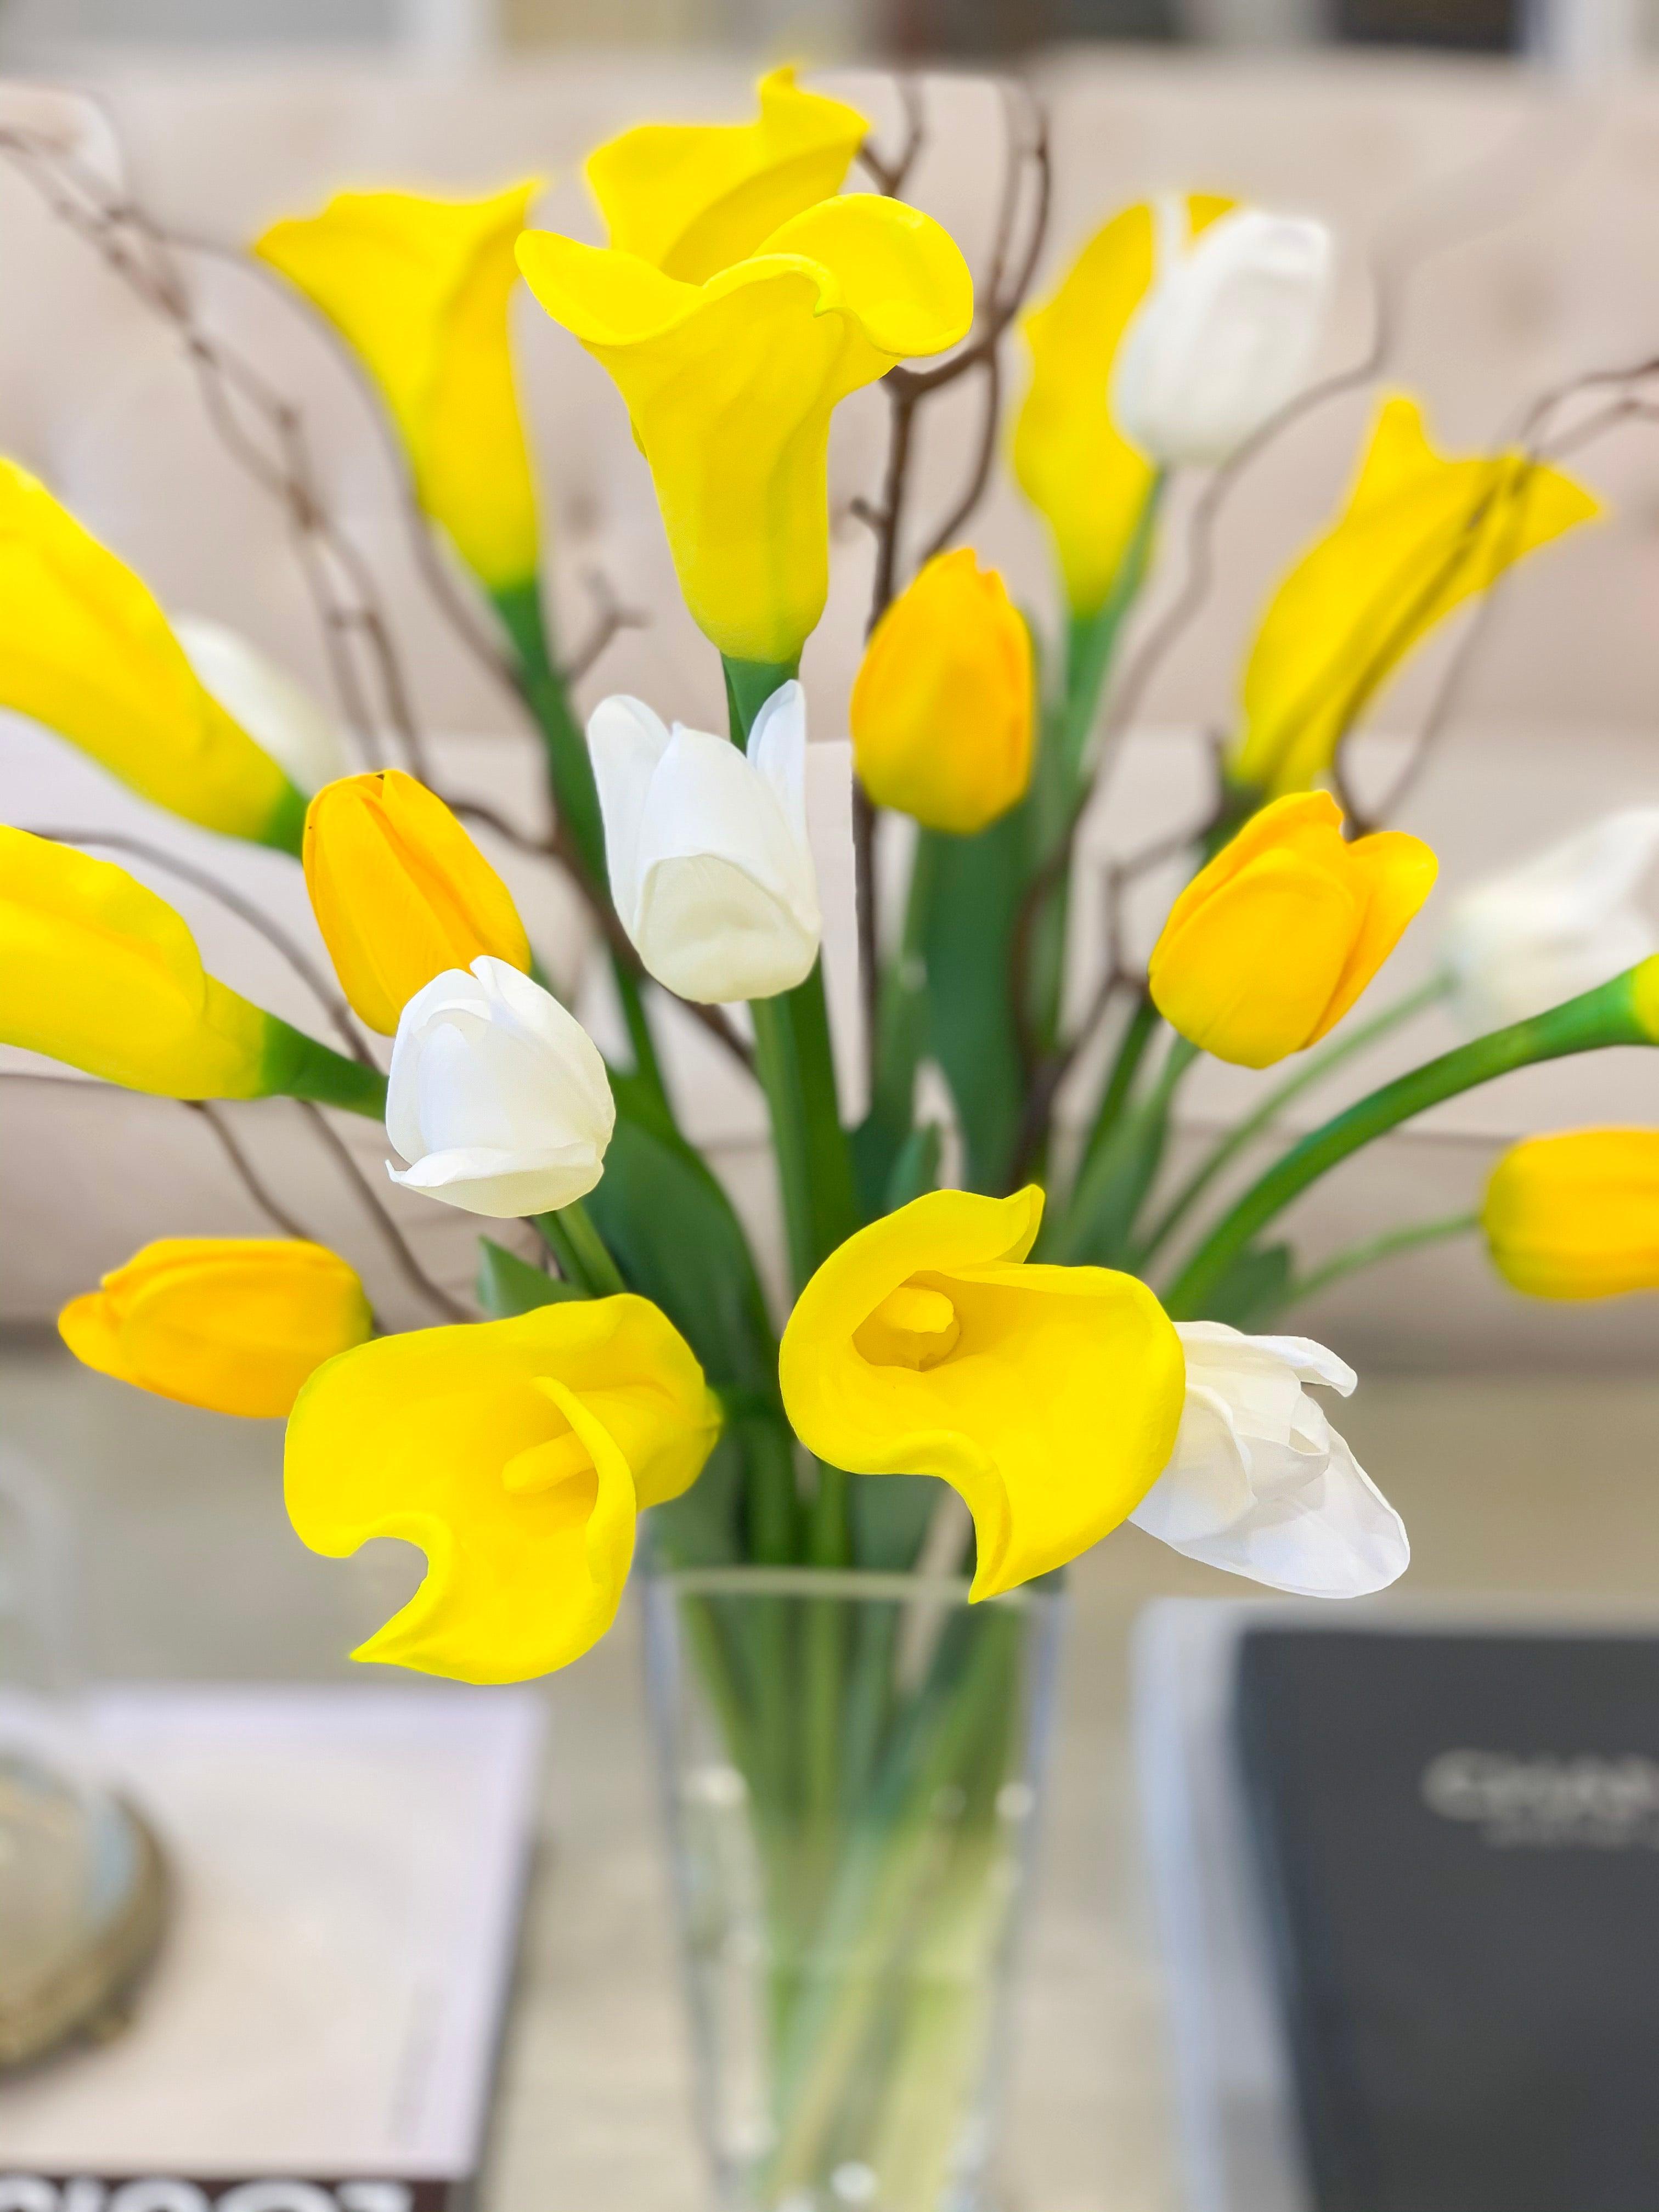 Yellow/White Real Touch Flowers Arrangement-Yellow Calla Lily Real Touch Arrangement-Real Touch Tulip-White/Yellow Tulips Centerpiece - Flovery